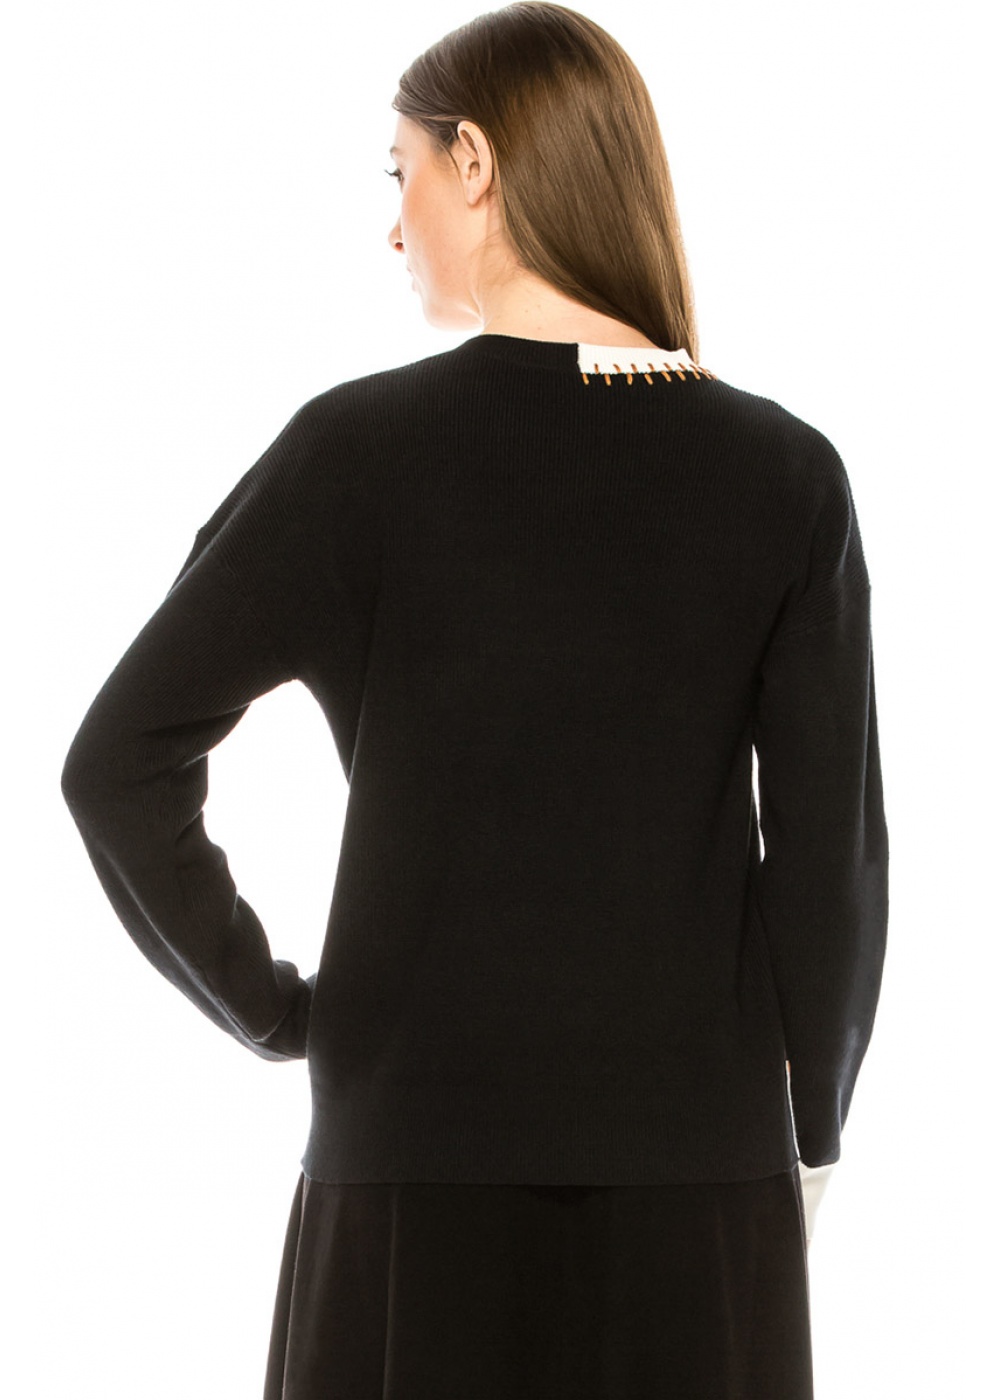 Crew neck black sweater with patch details